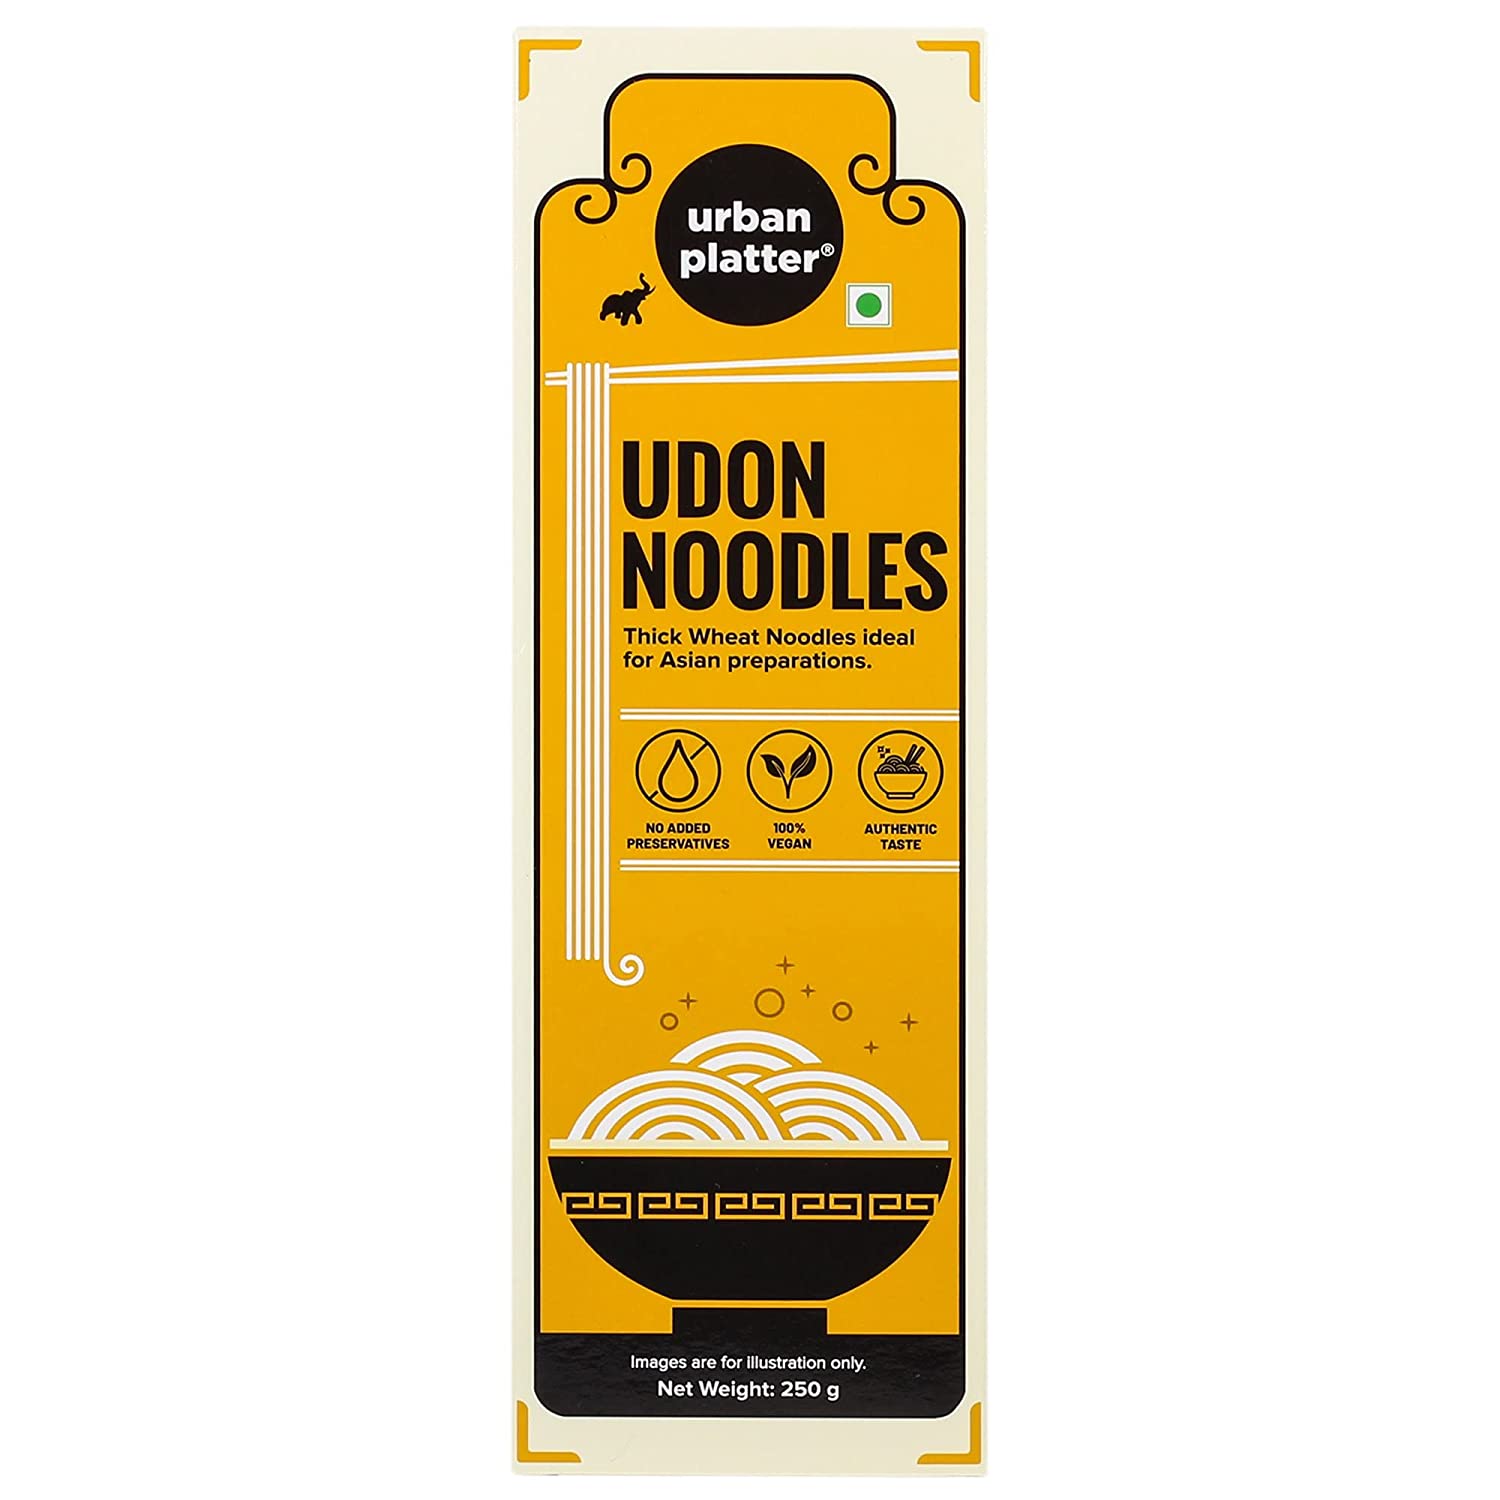 Urban Platter Udon Noodles, 250g (Thick Wheat Noodles, Ideal for Asian Preparations, No Added Preservatives)